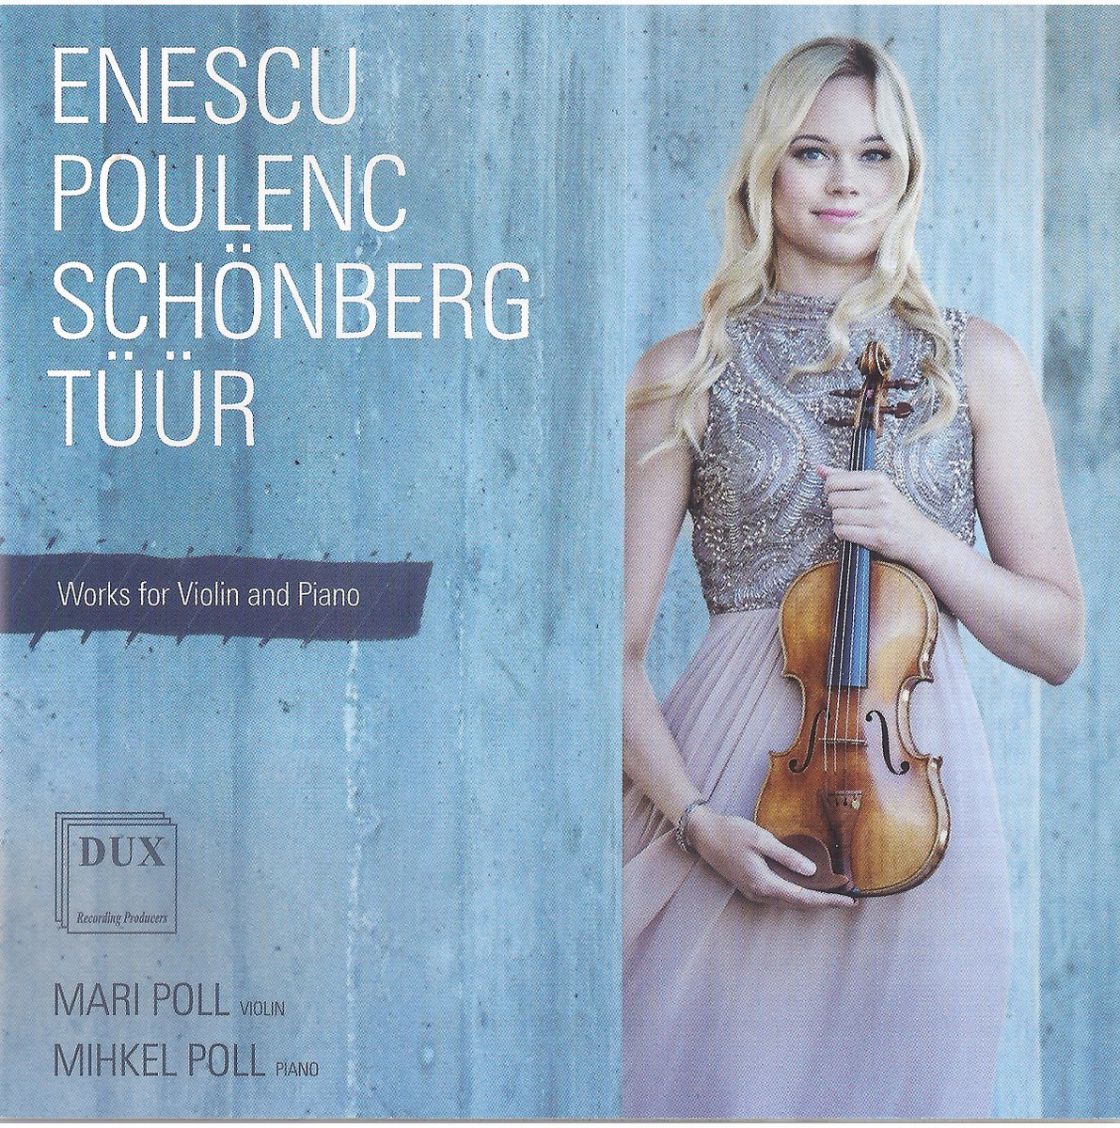 ENESCU POULENC SCHONBERG TUUR Works for violin and piano